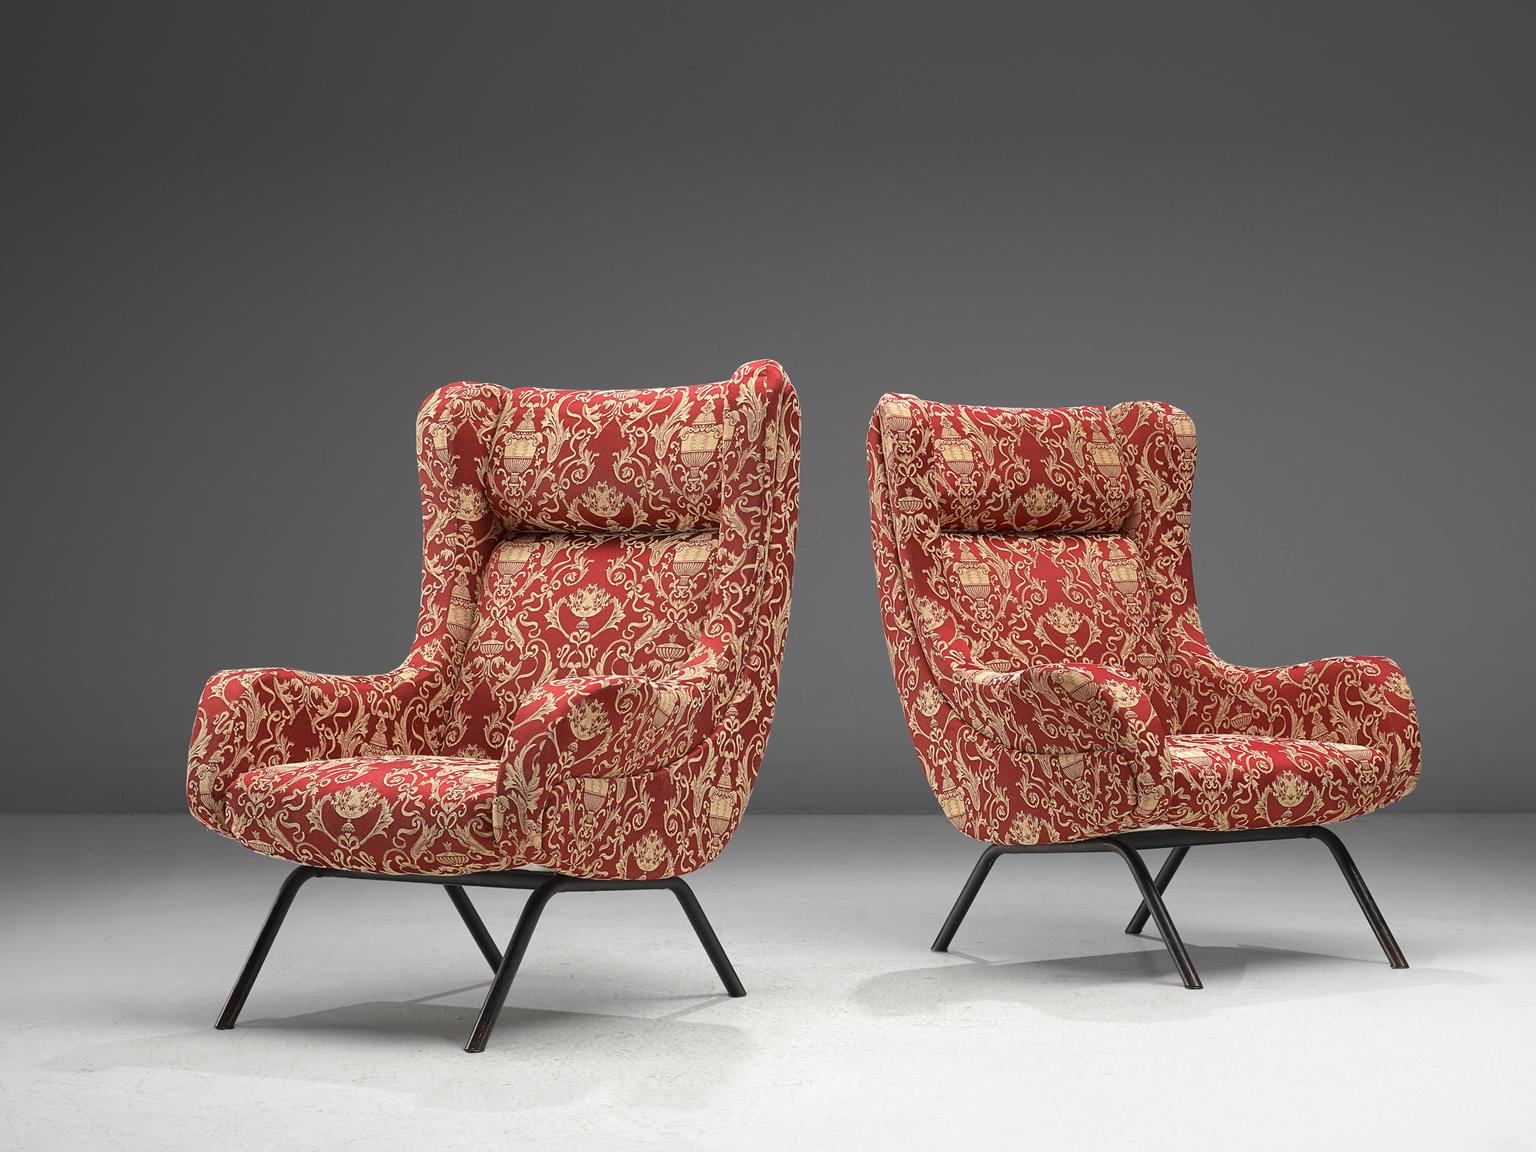 Lounge chairs, original red fabric and brass, Italy, 1950s. 

These chairs are iconic examples of Italian design from the fifties. Organic and sculptural, these easy chairs are anything but minimalistic. Equipped with the original stiletto brass